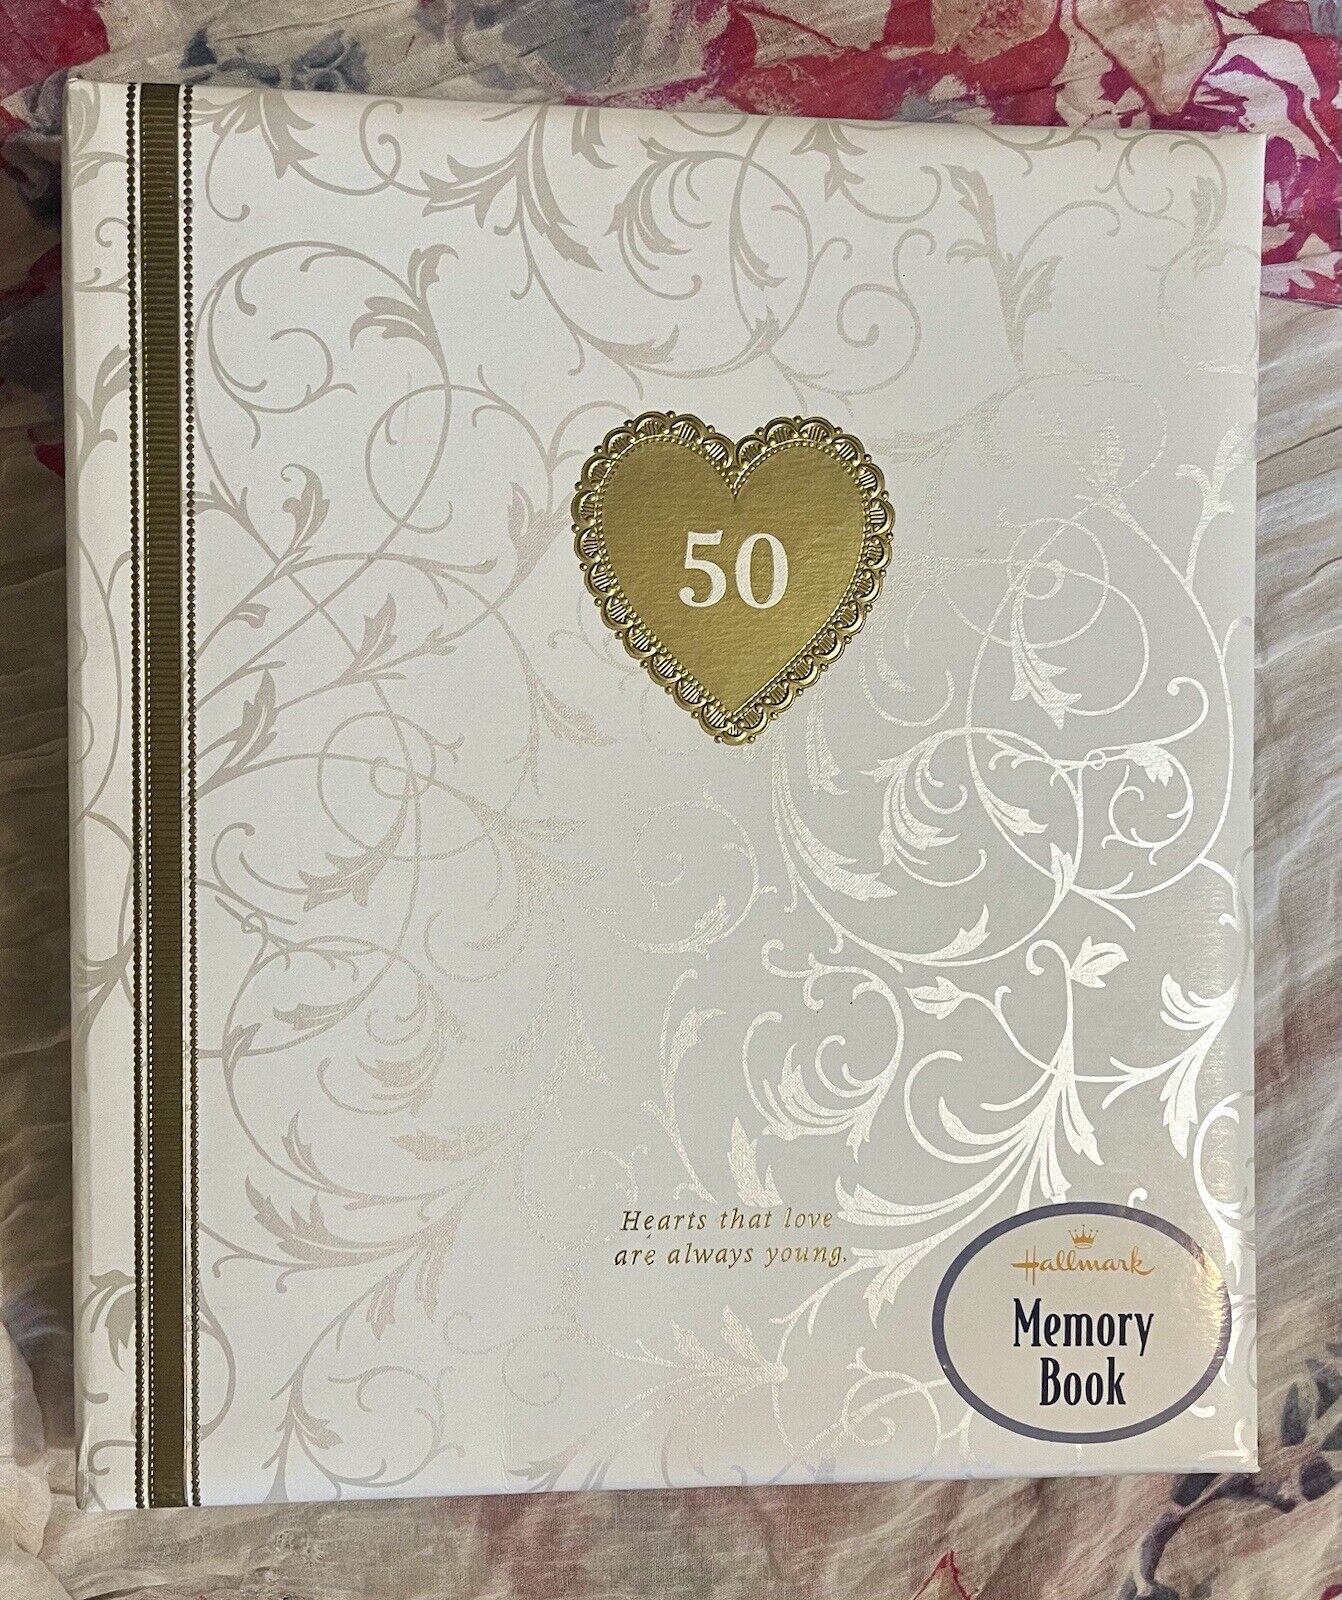 Hallmark 50th Anniversary Memory Book “Hearts That Love Are Always Young”